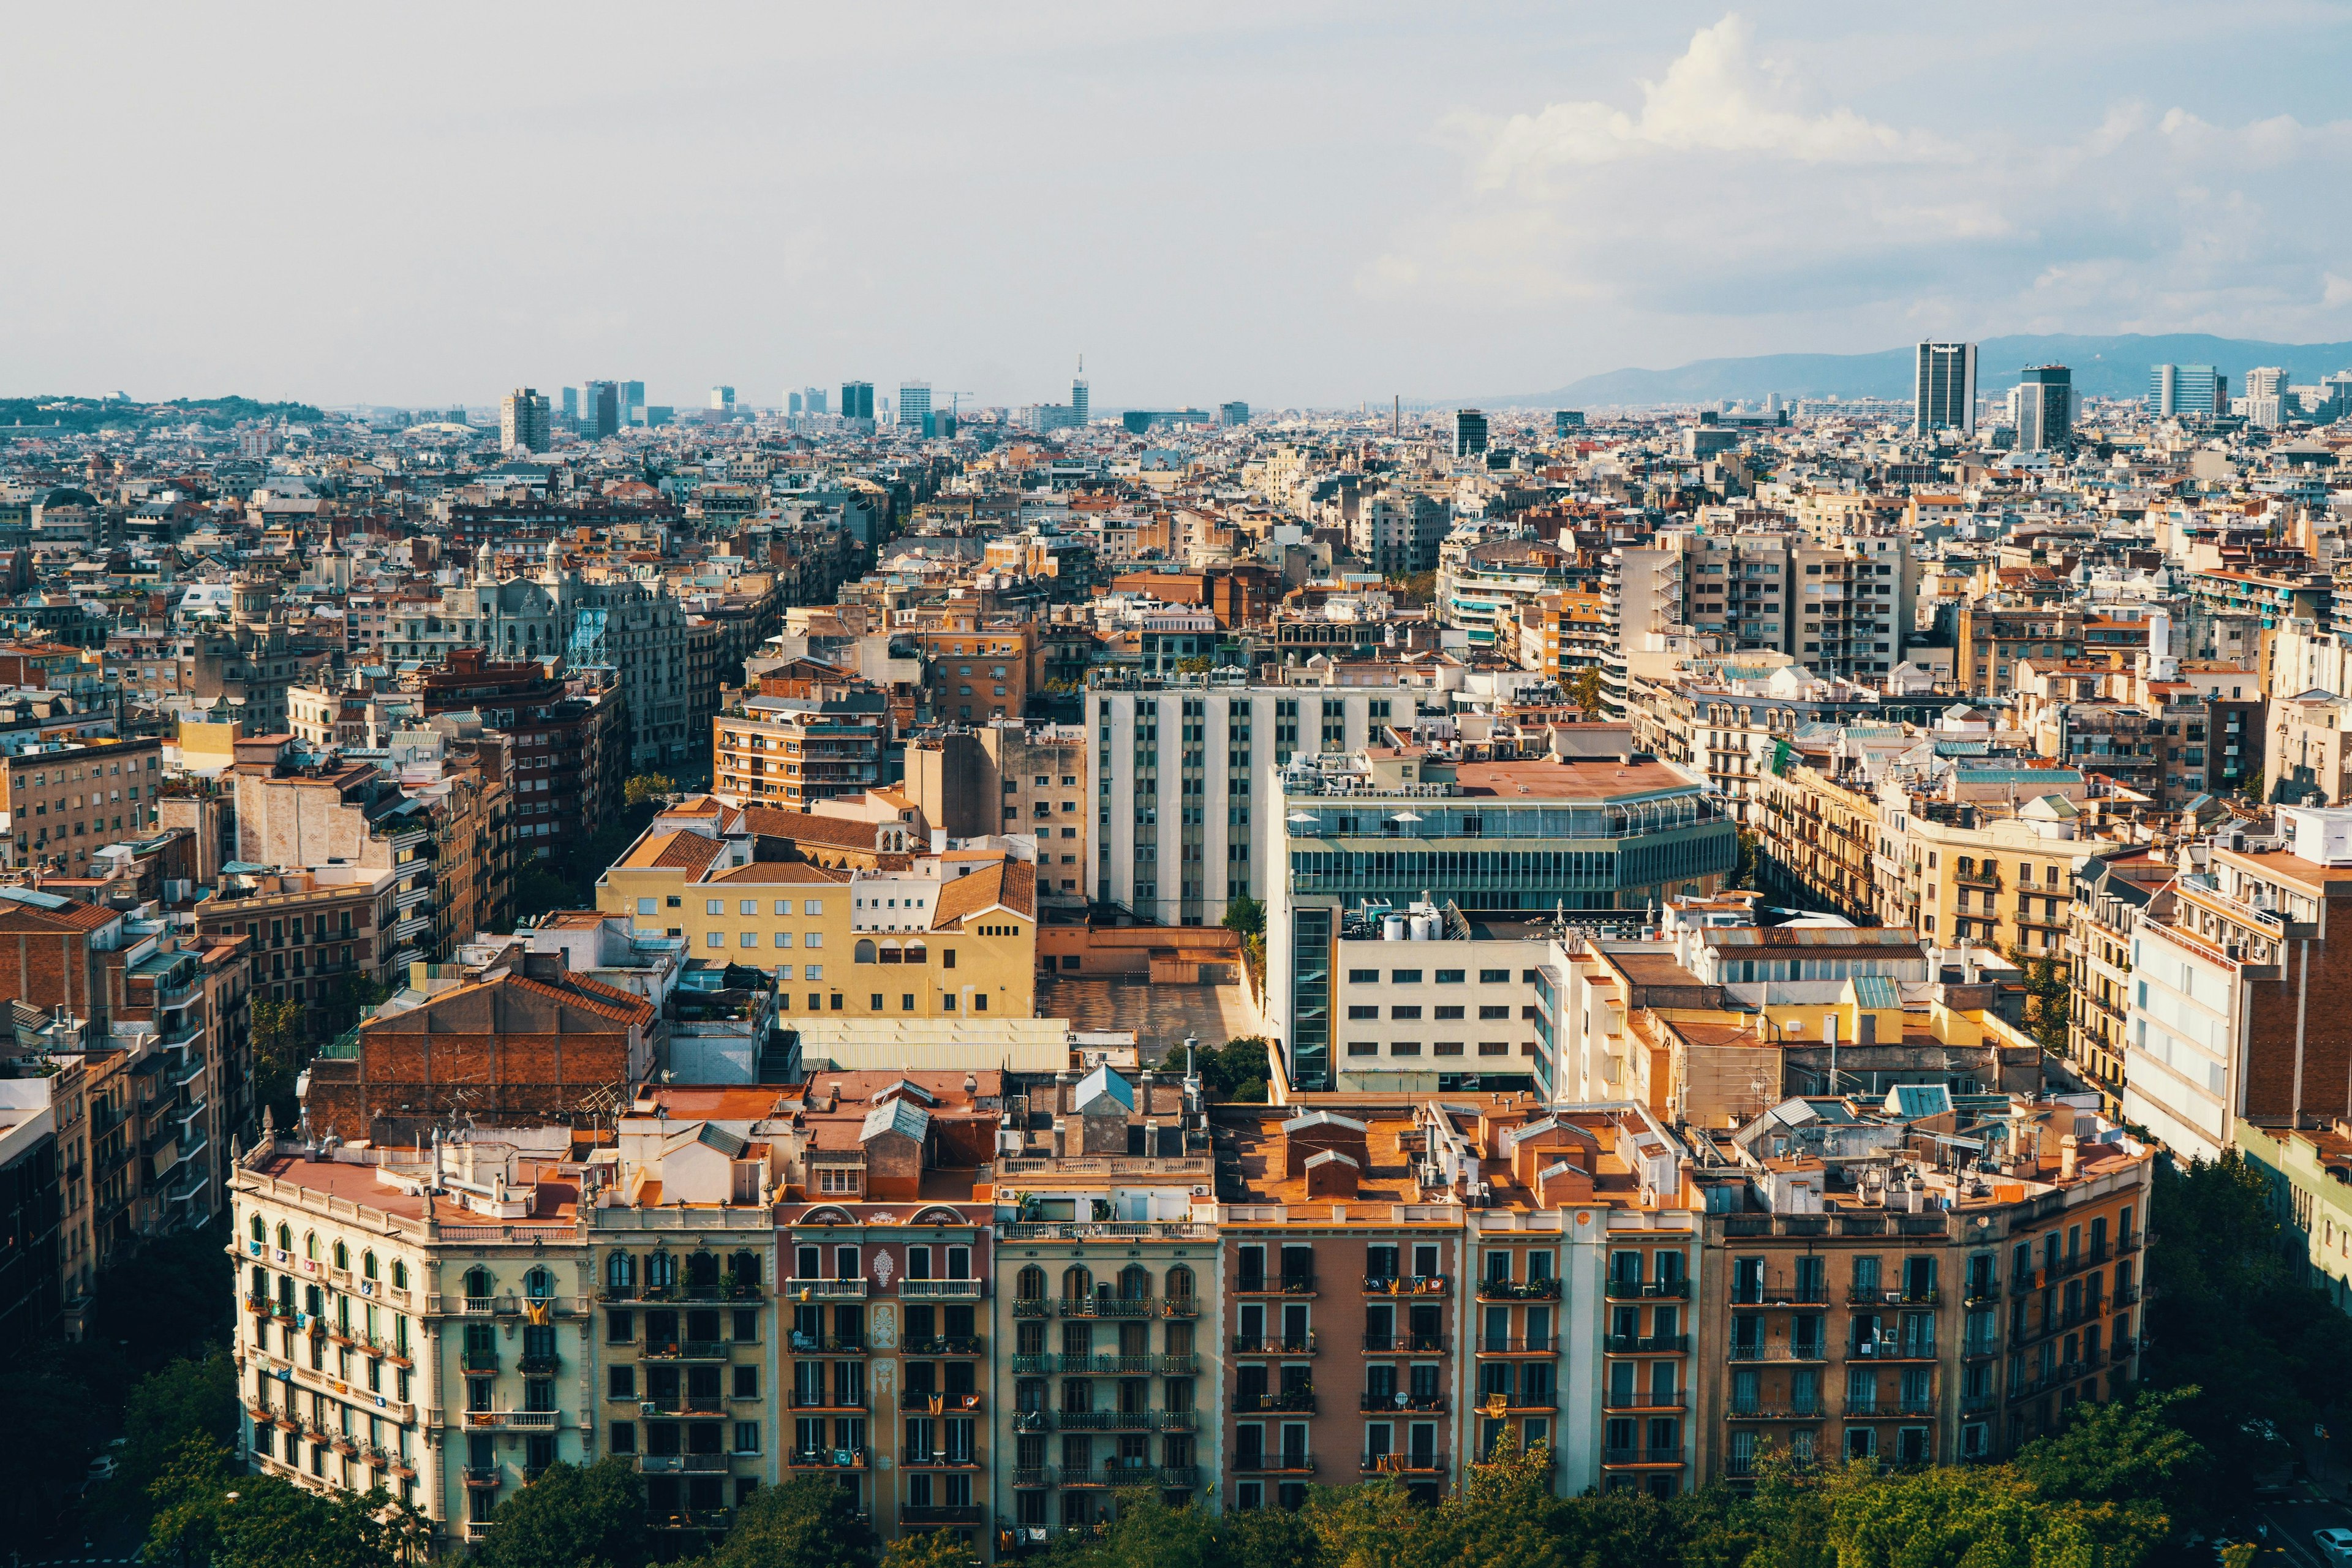 Best place to learn Spanish: Barcelona